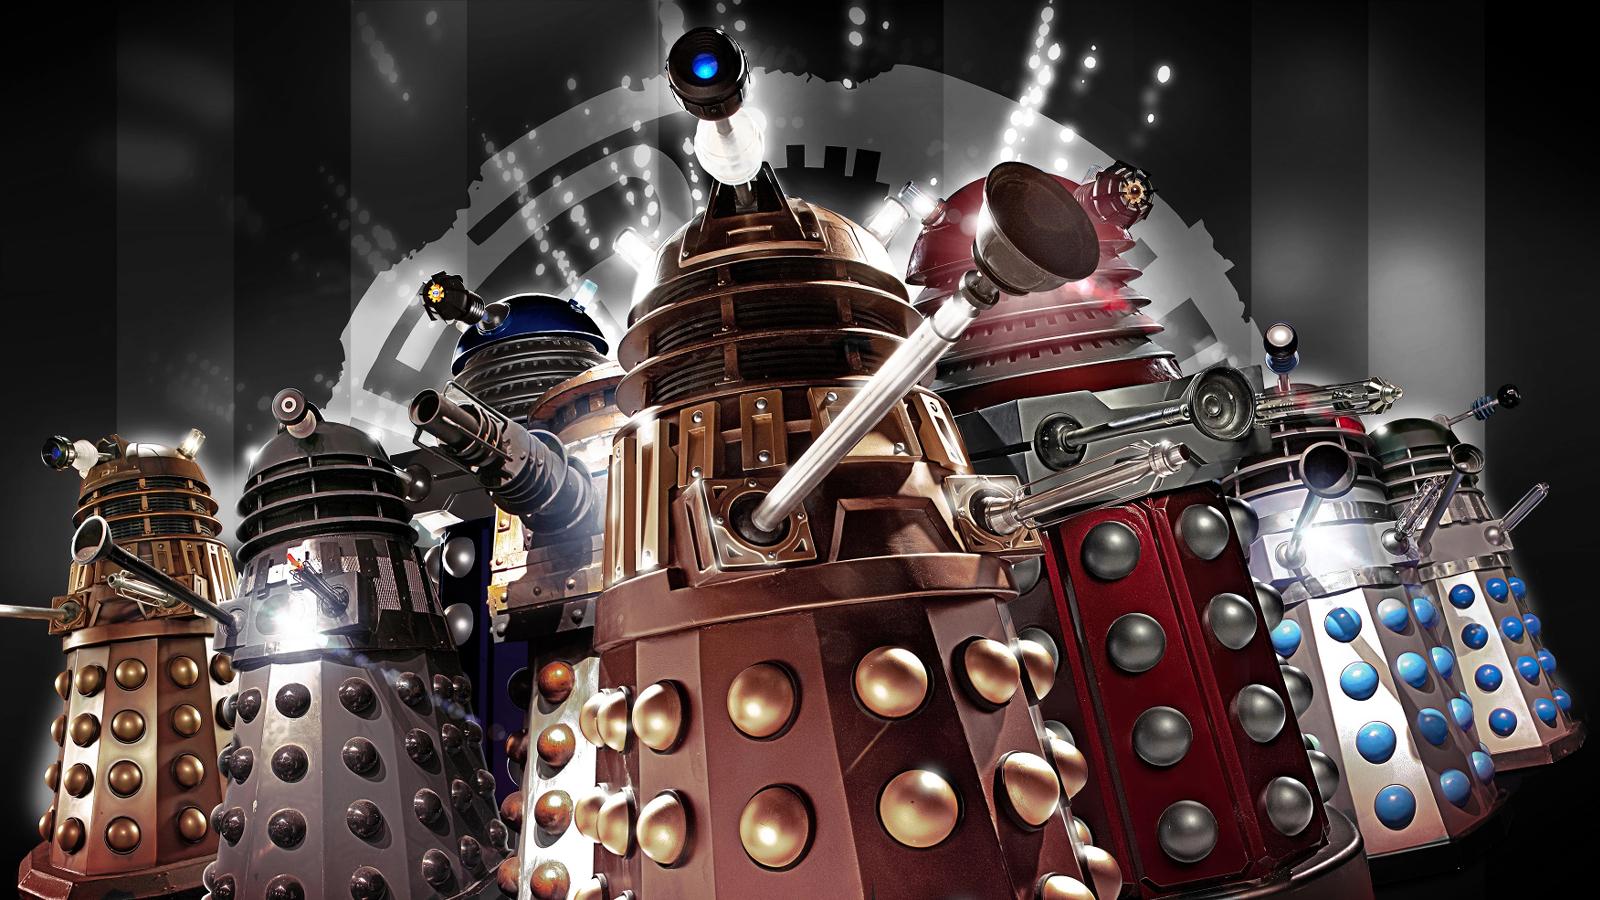 A Doctor Who promotional still featuring Daleks with the background converted to black and white.